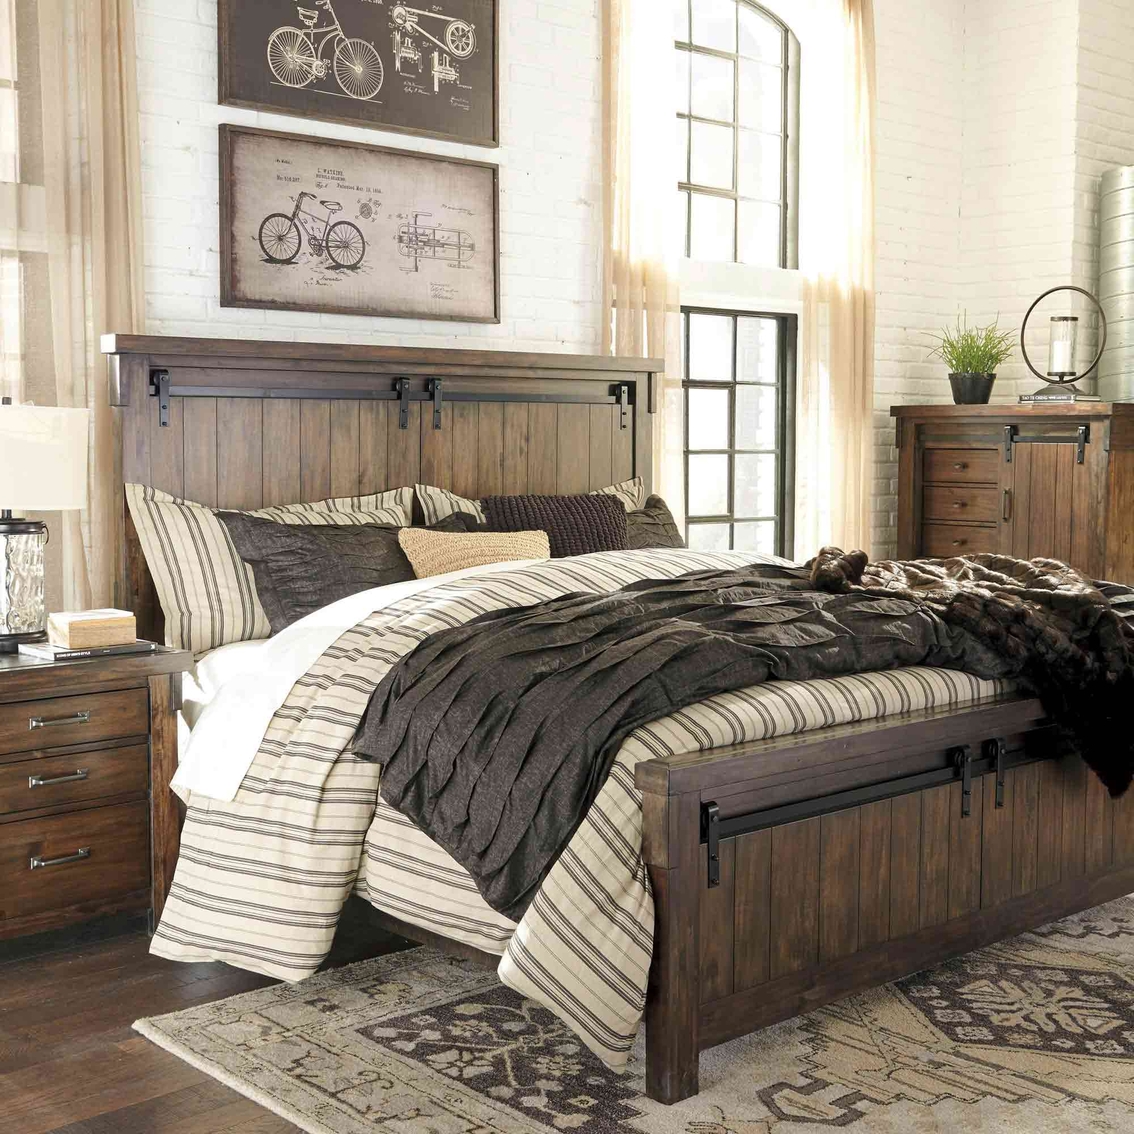 Signature Design by Ashley Lakeleigh Panel Bed - Image 2 of 4